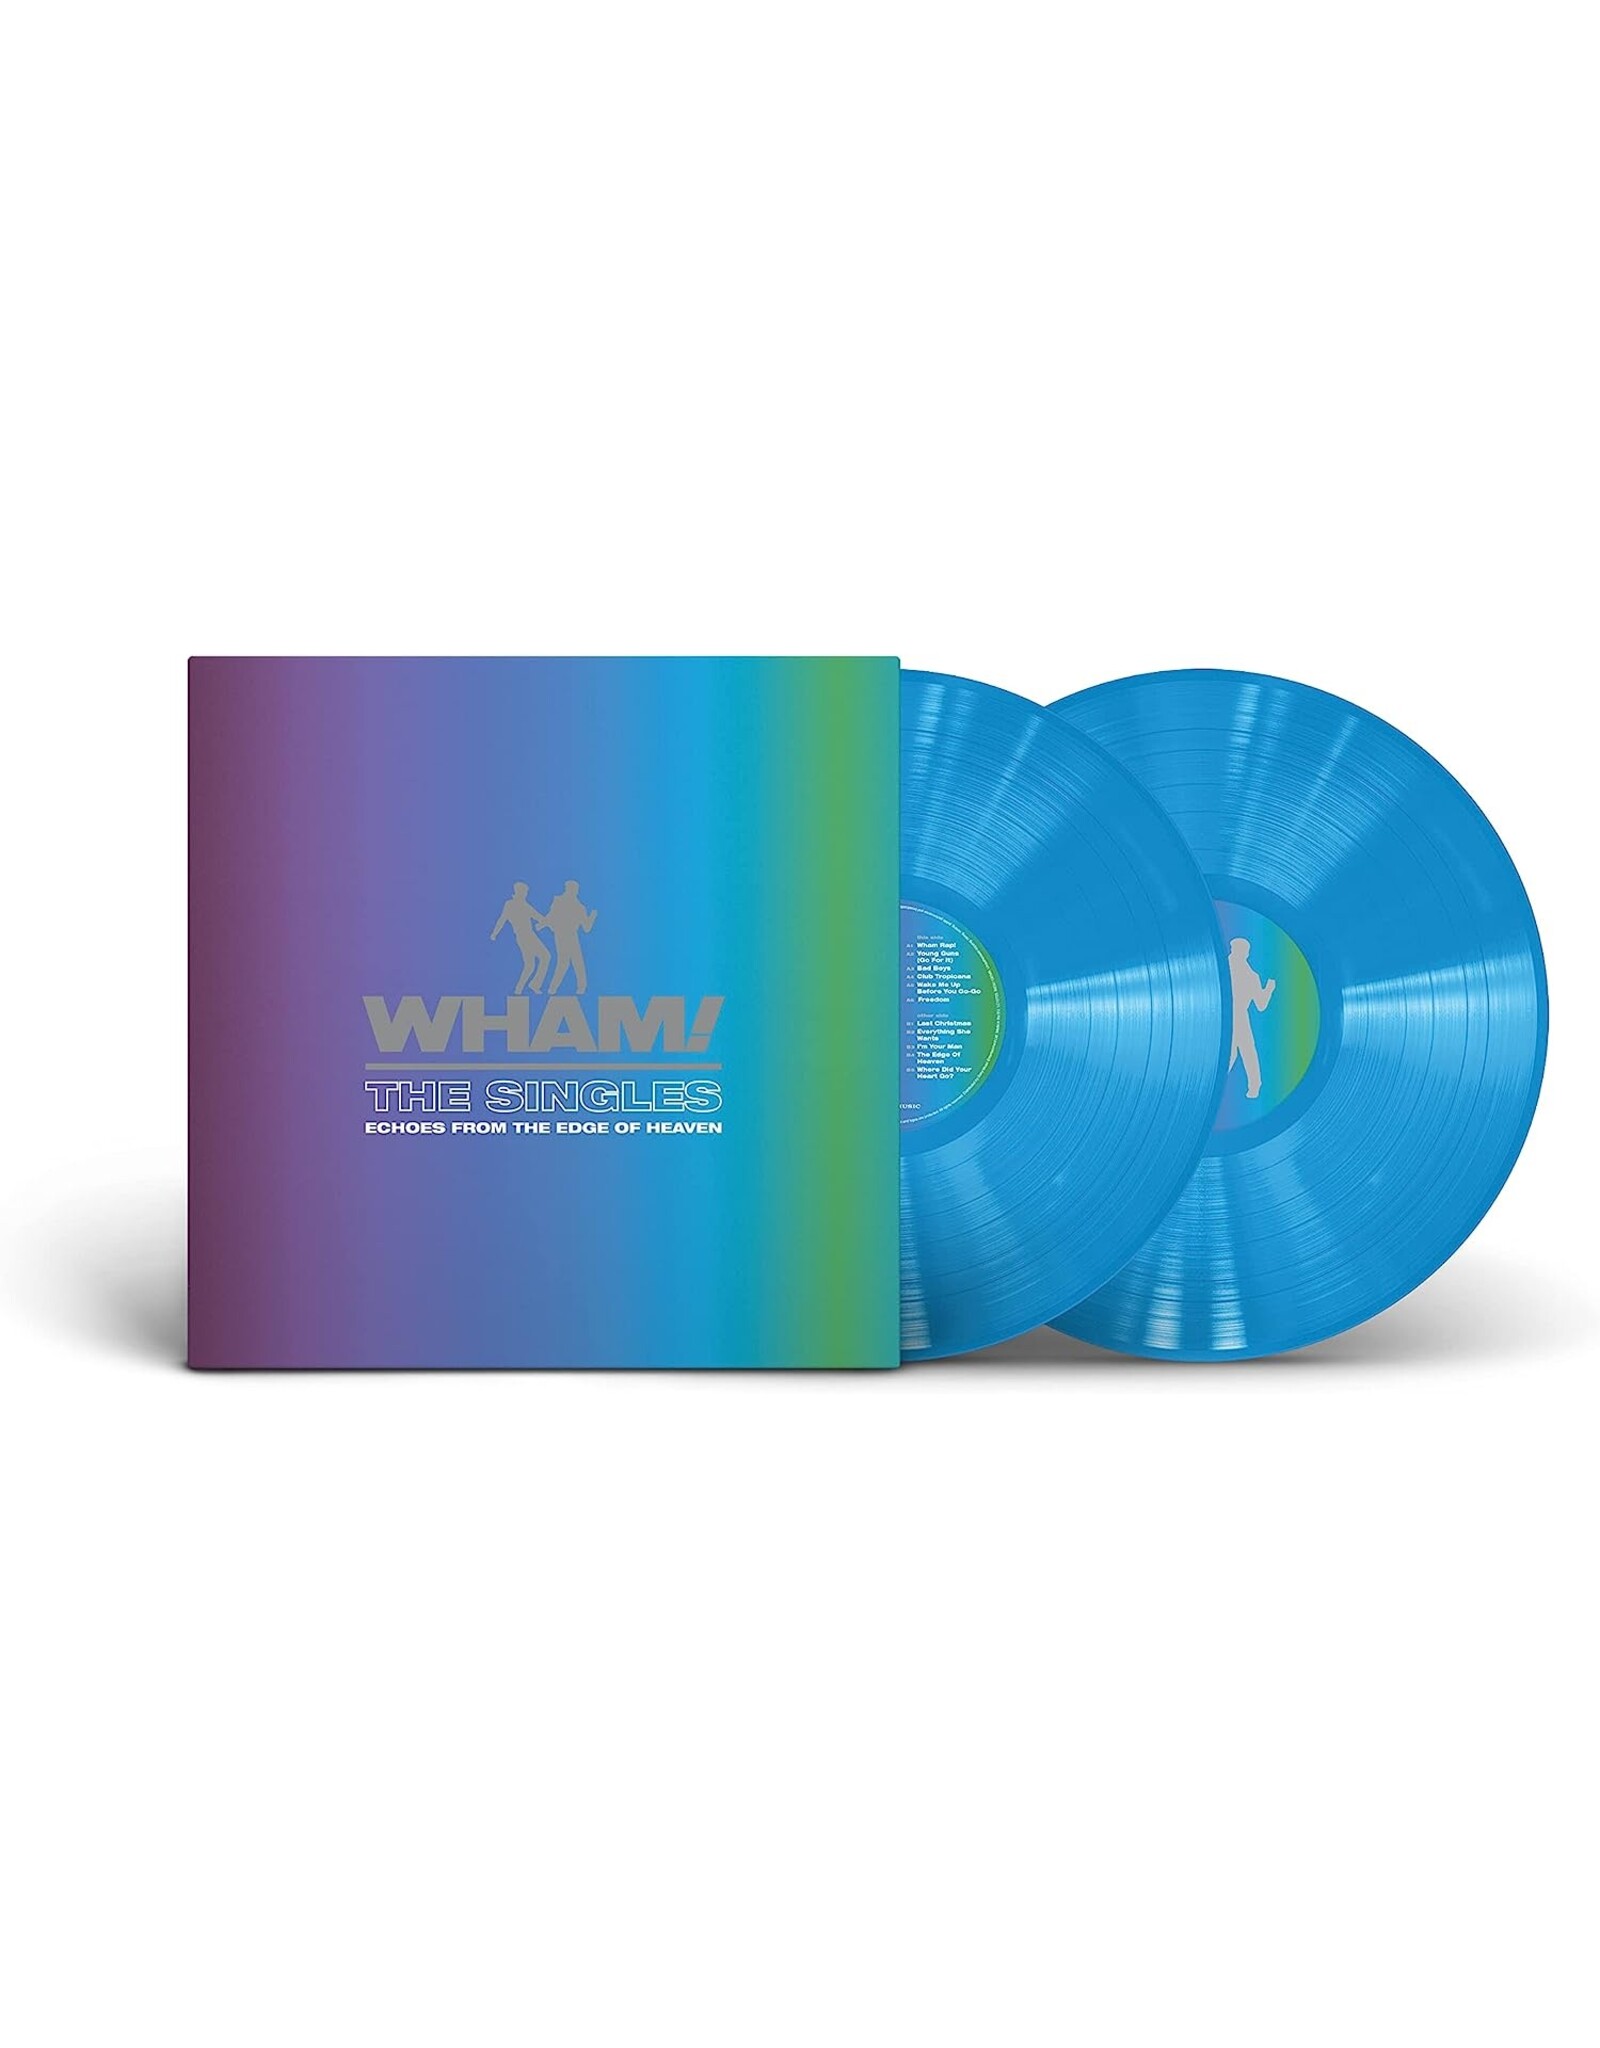 Wham! - The Singles: Echoes From The Edge Of Heaven (Blue Vinyl)